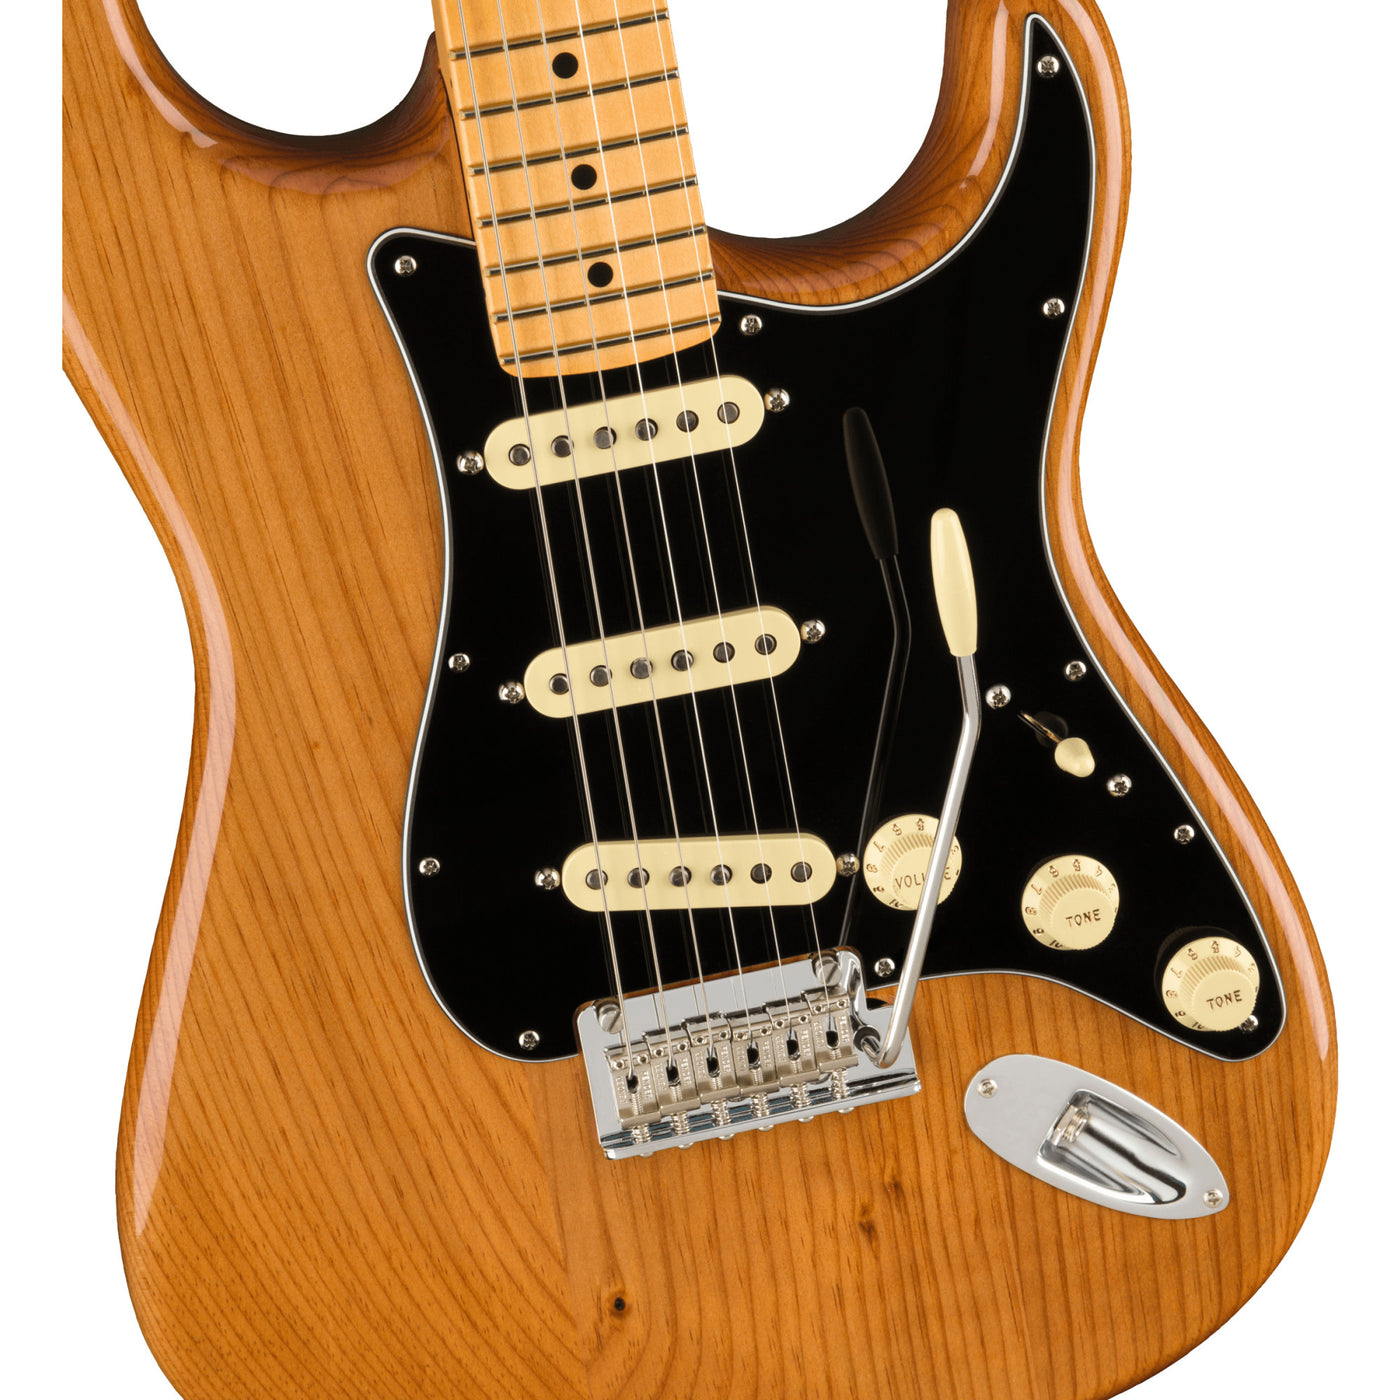 Fender American Professional ll Stratocaster Electric Guitar, Roasted Pine (0113902763)